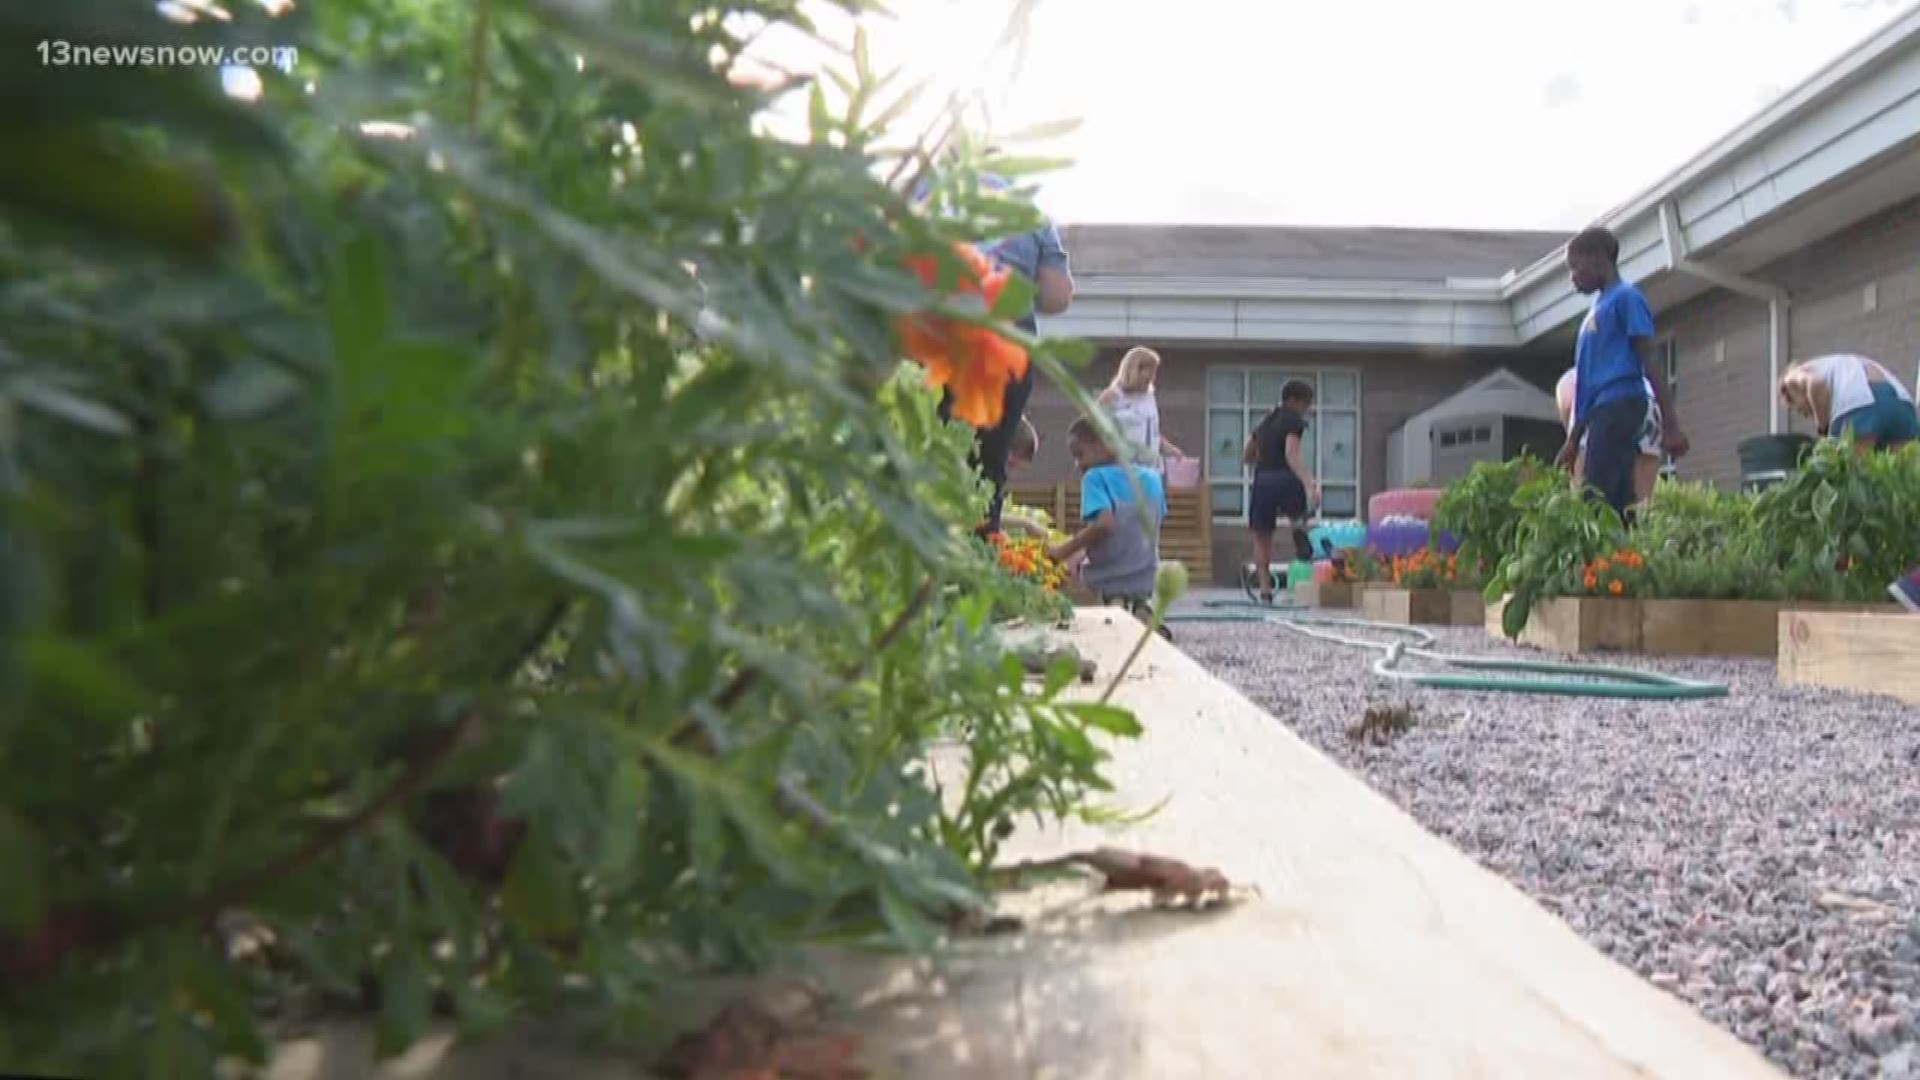 Students, families, and teachers volunteered to weed and water the community garden at Seatack Elementary School Wednesday night. "We do it all throughout the summer for the kids to get plants and healthy eating in. And, for the kids to get a good workout in with their families," Gifted Resource teacher at Seatack, Marie Culver, said.